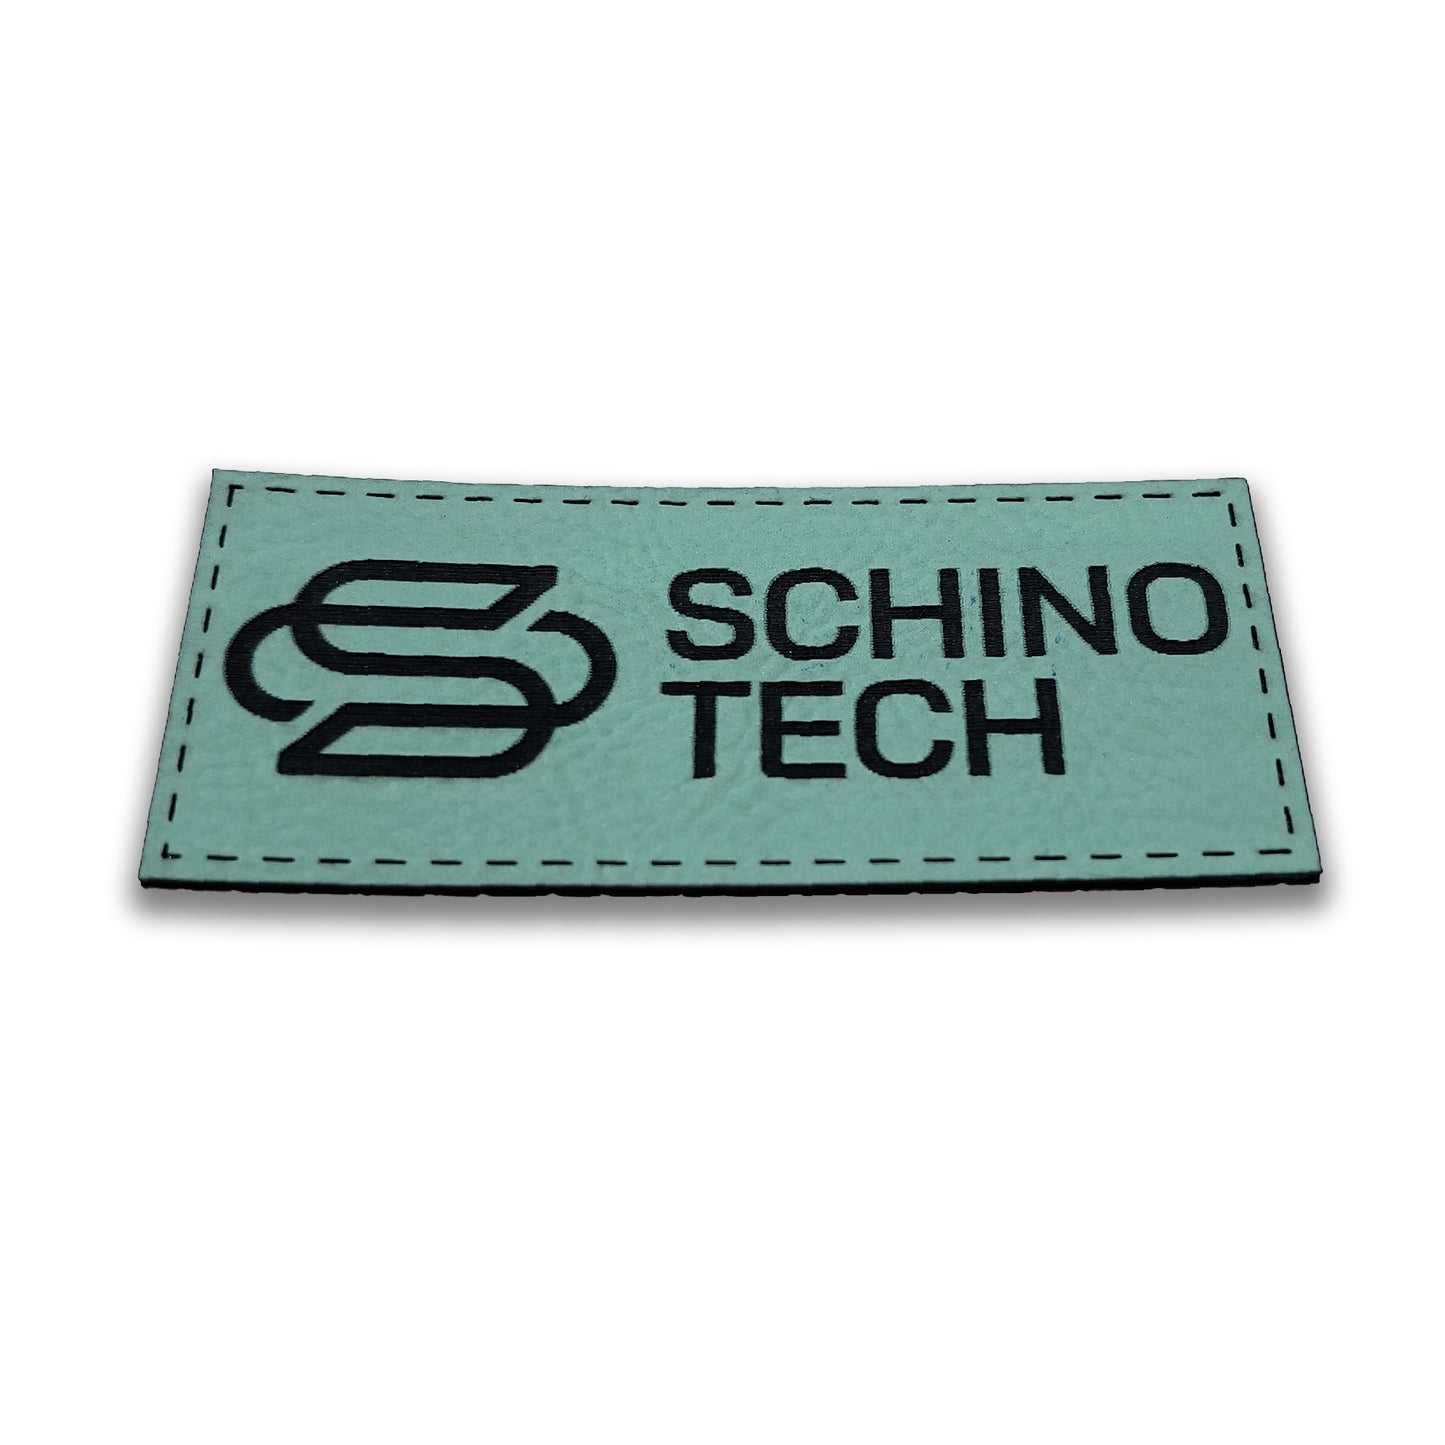 Laser-Engraved Leatherette Patch